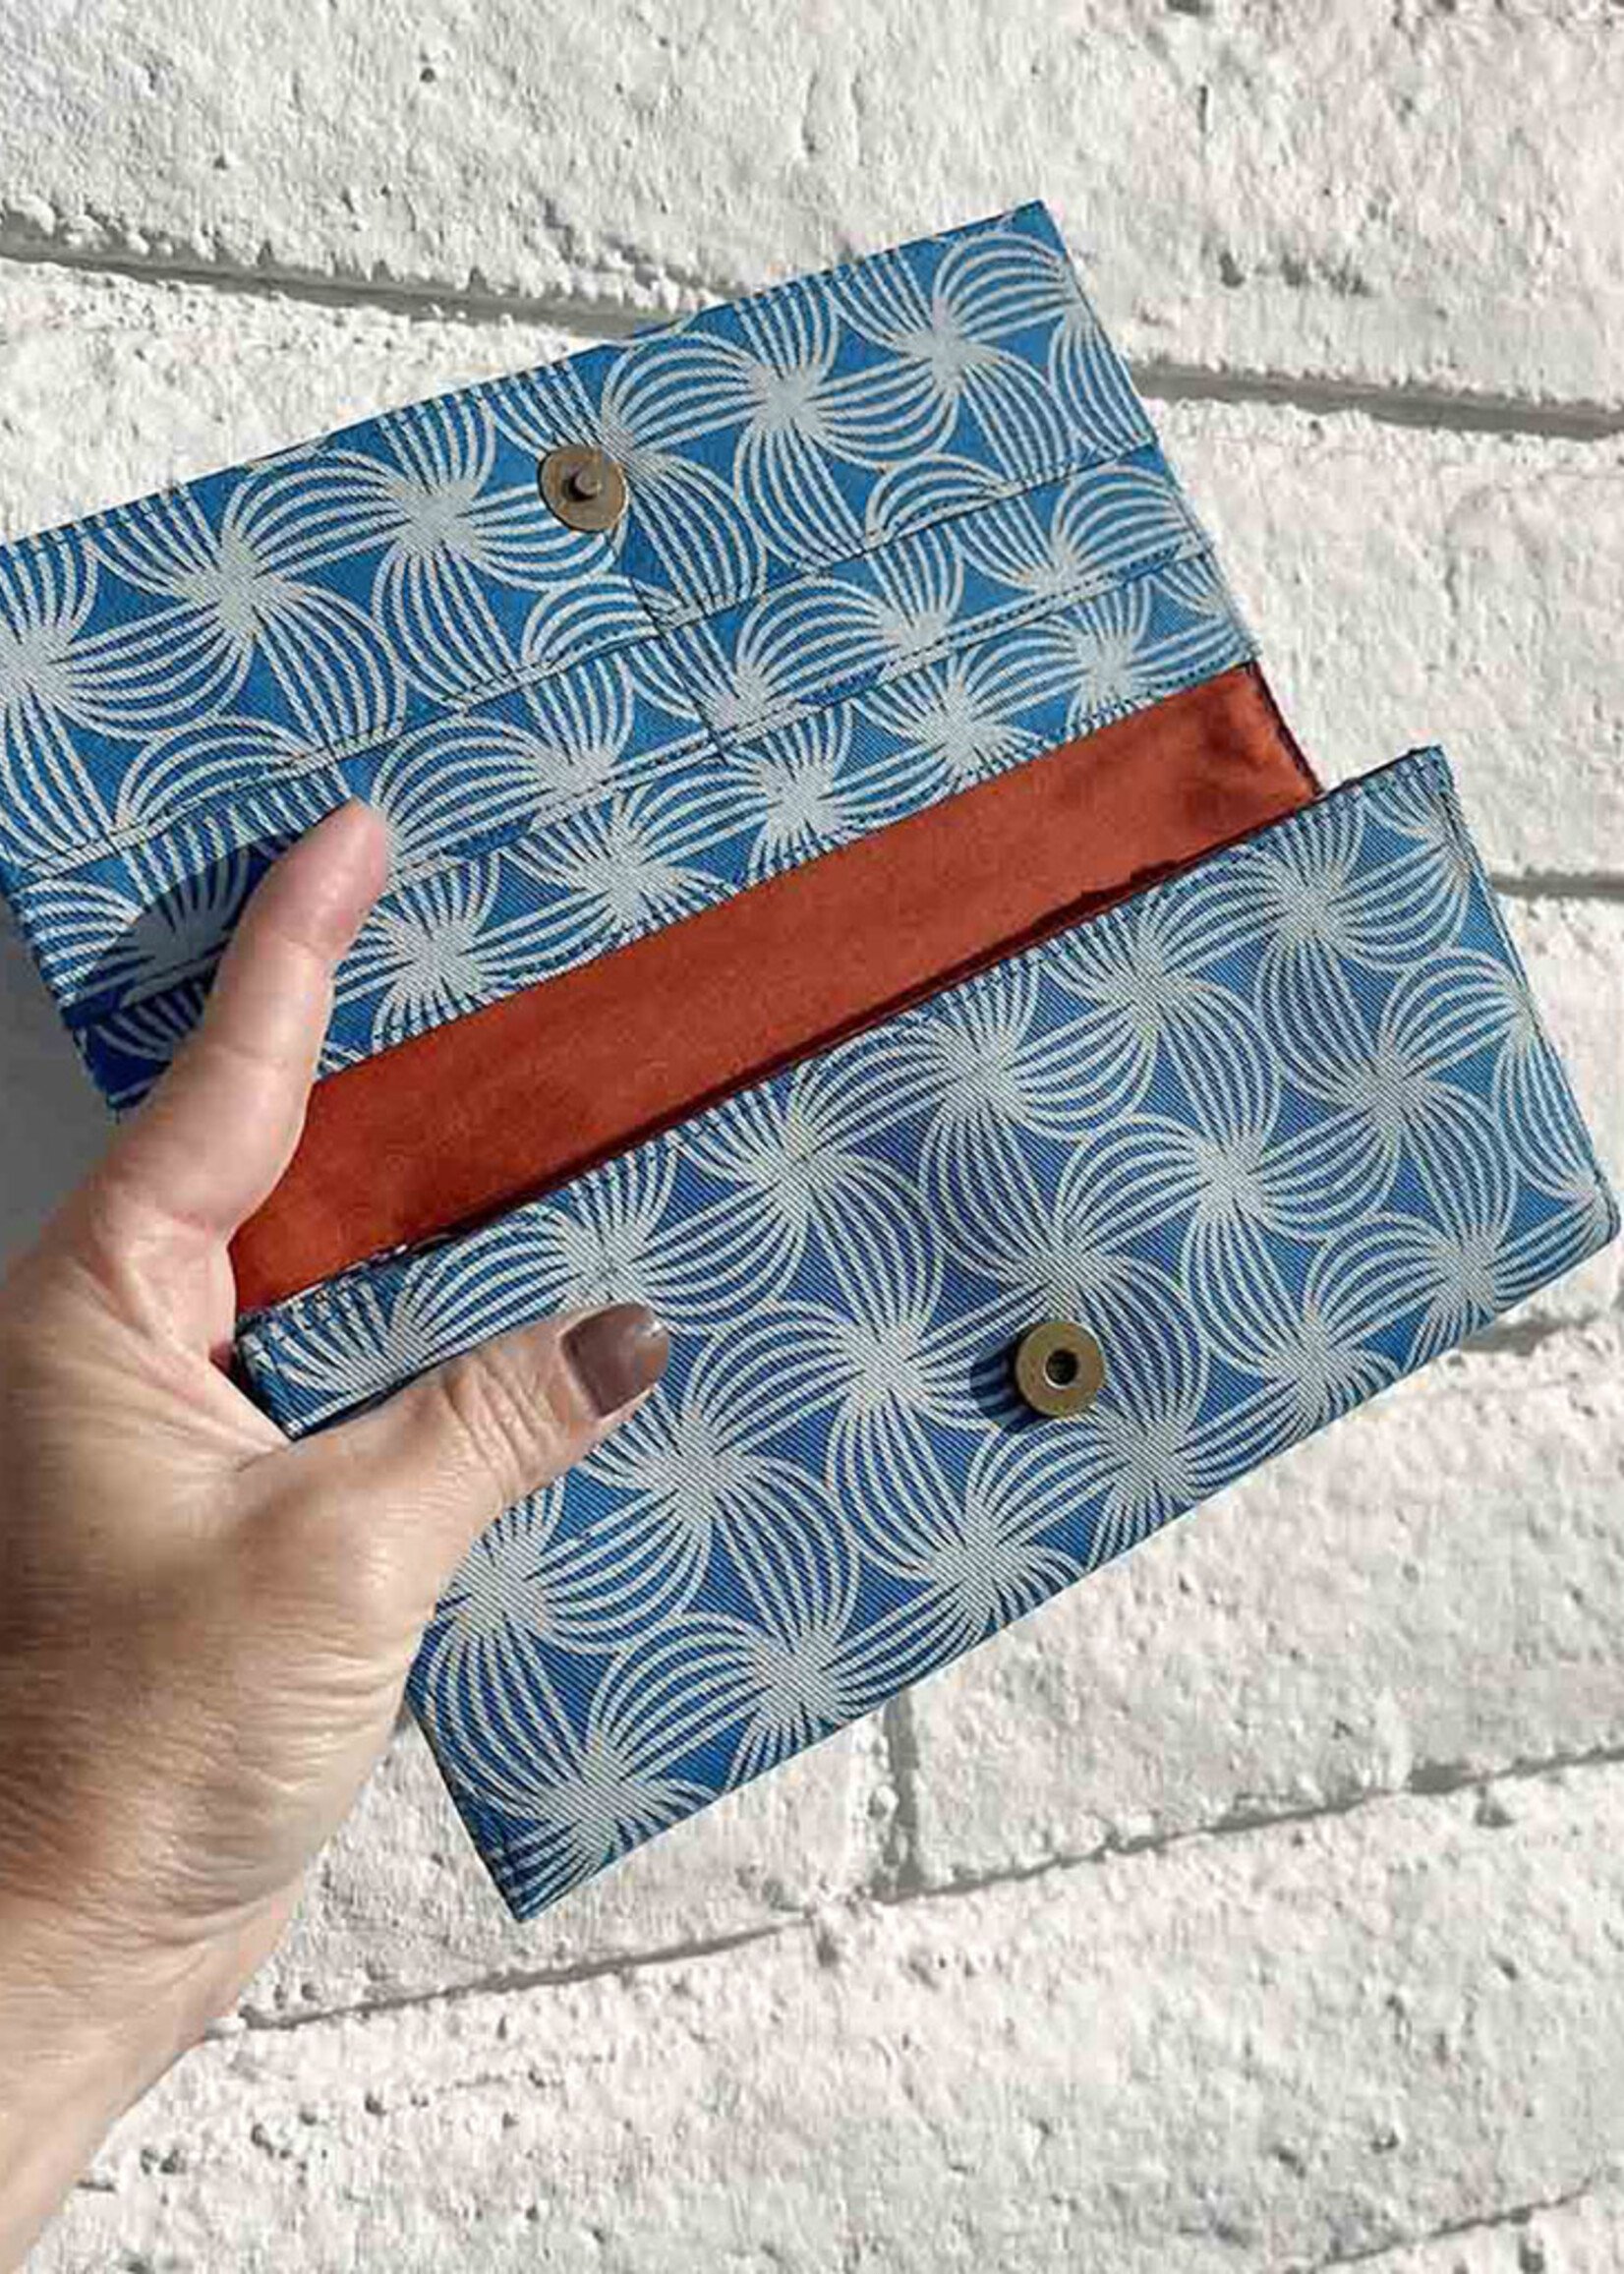 Malia Designs Sustainable Cotton Long Wallet